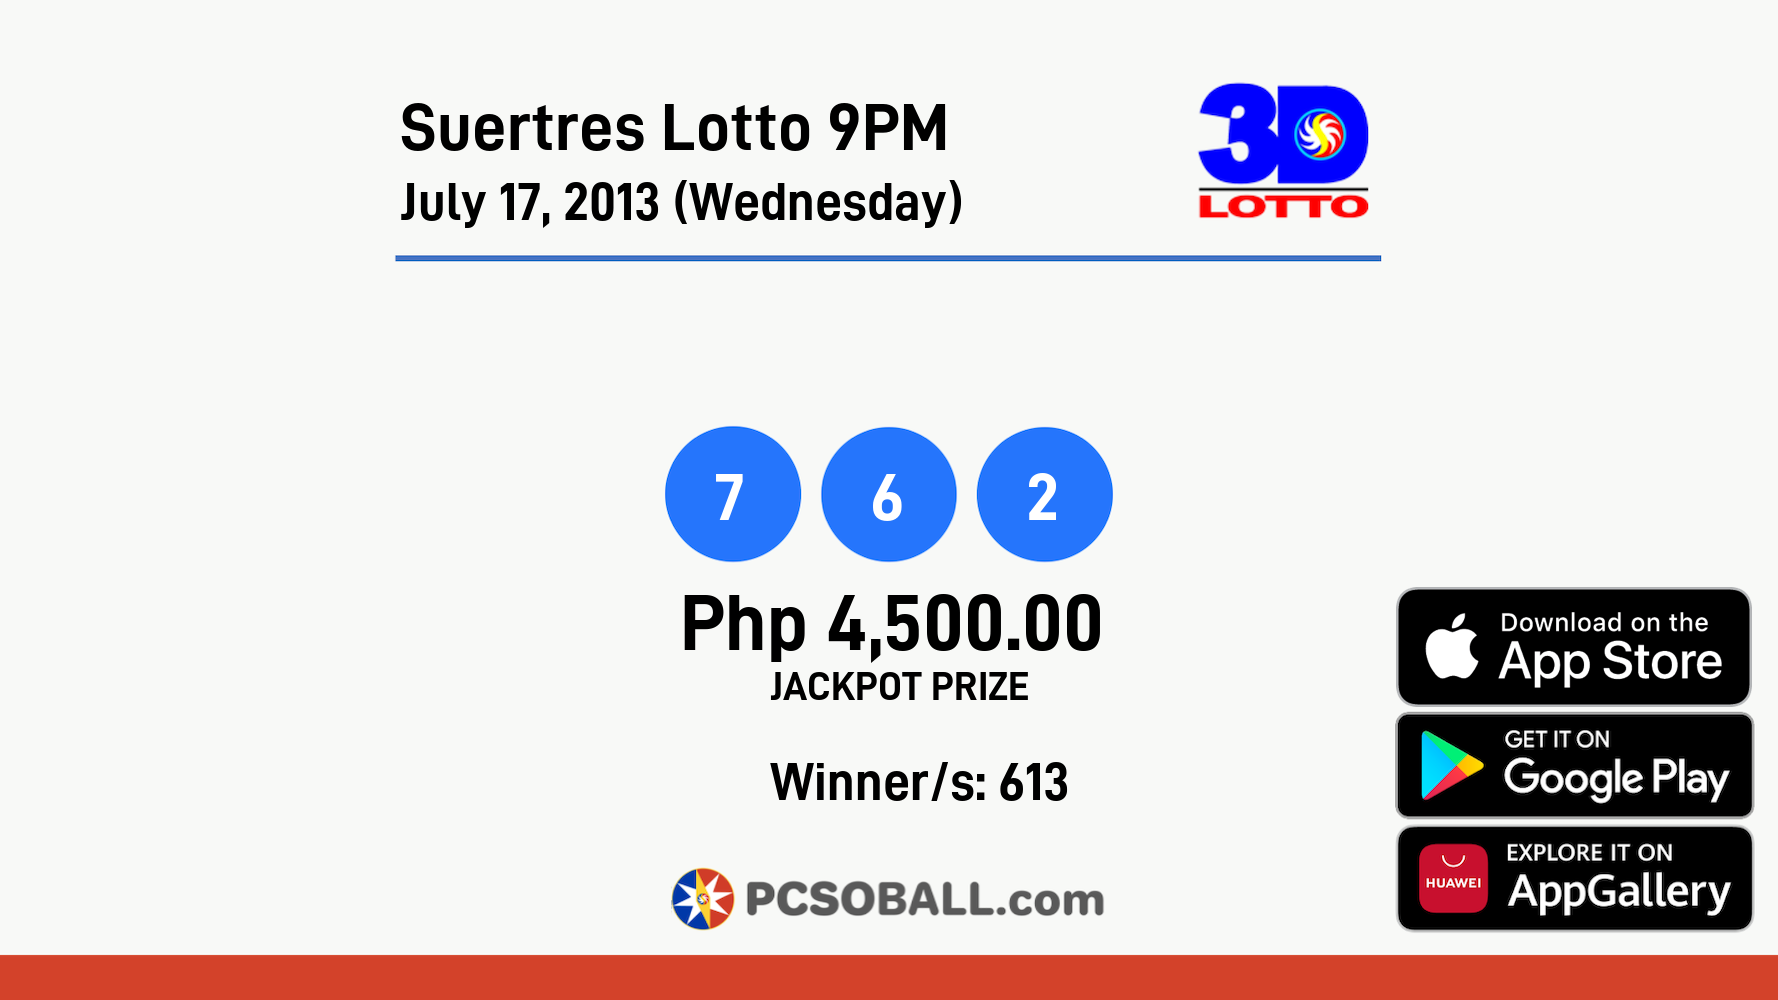 Suertres Lotto 9PM July 17, 2013 (Wednesday) Result